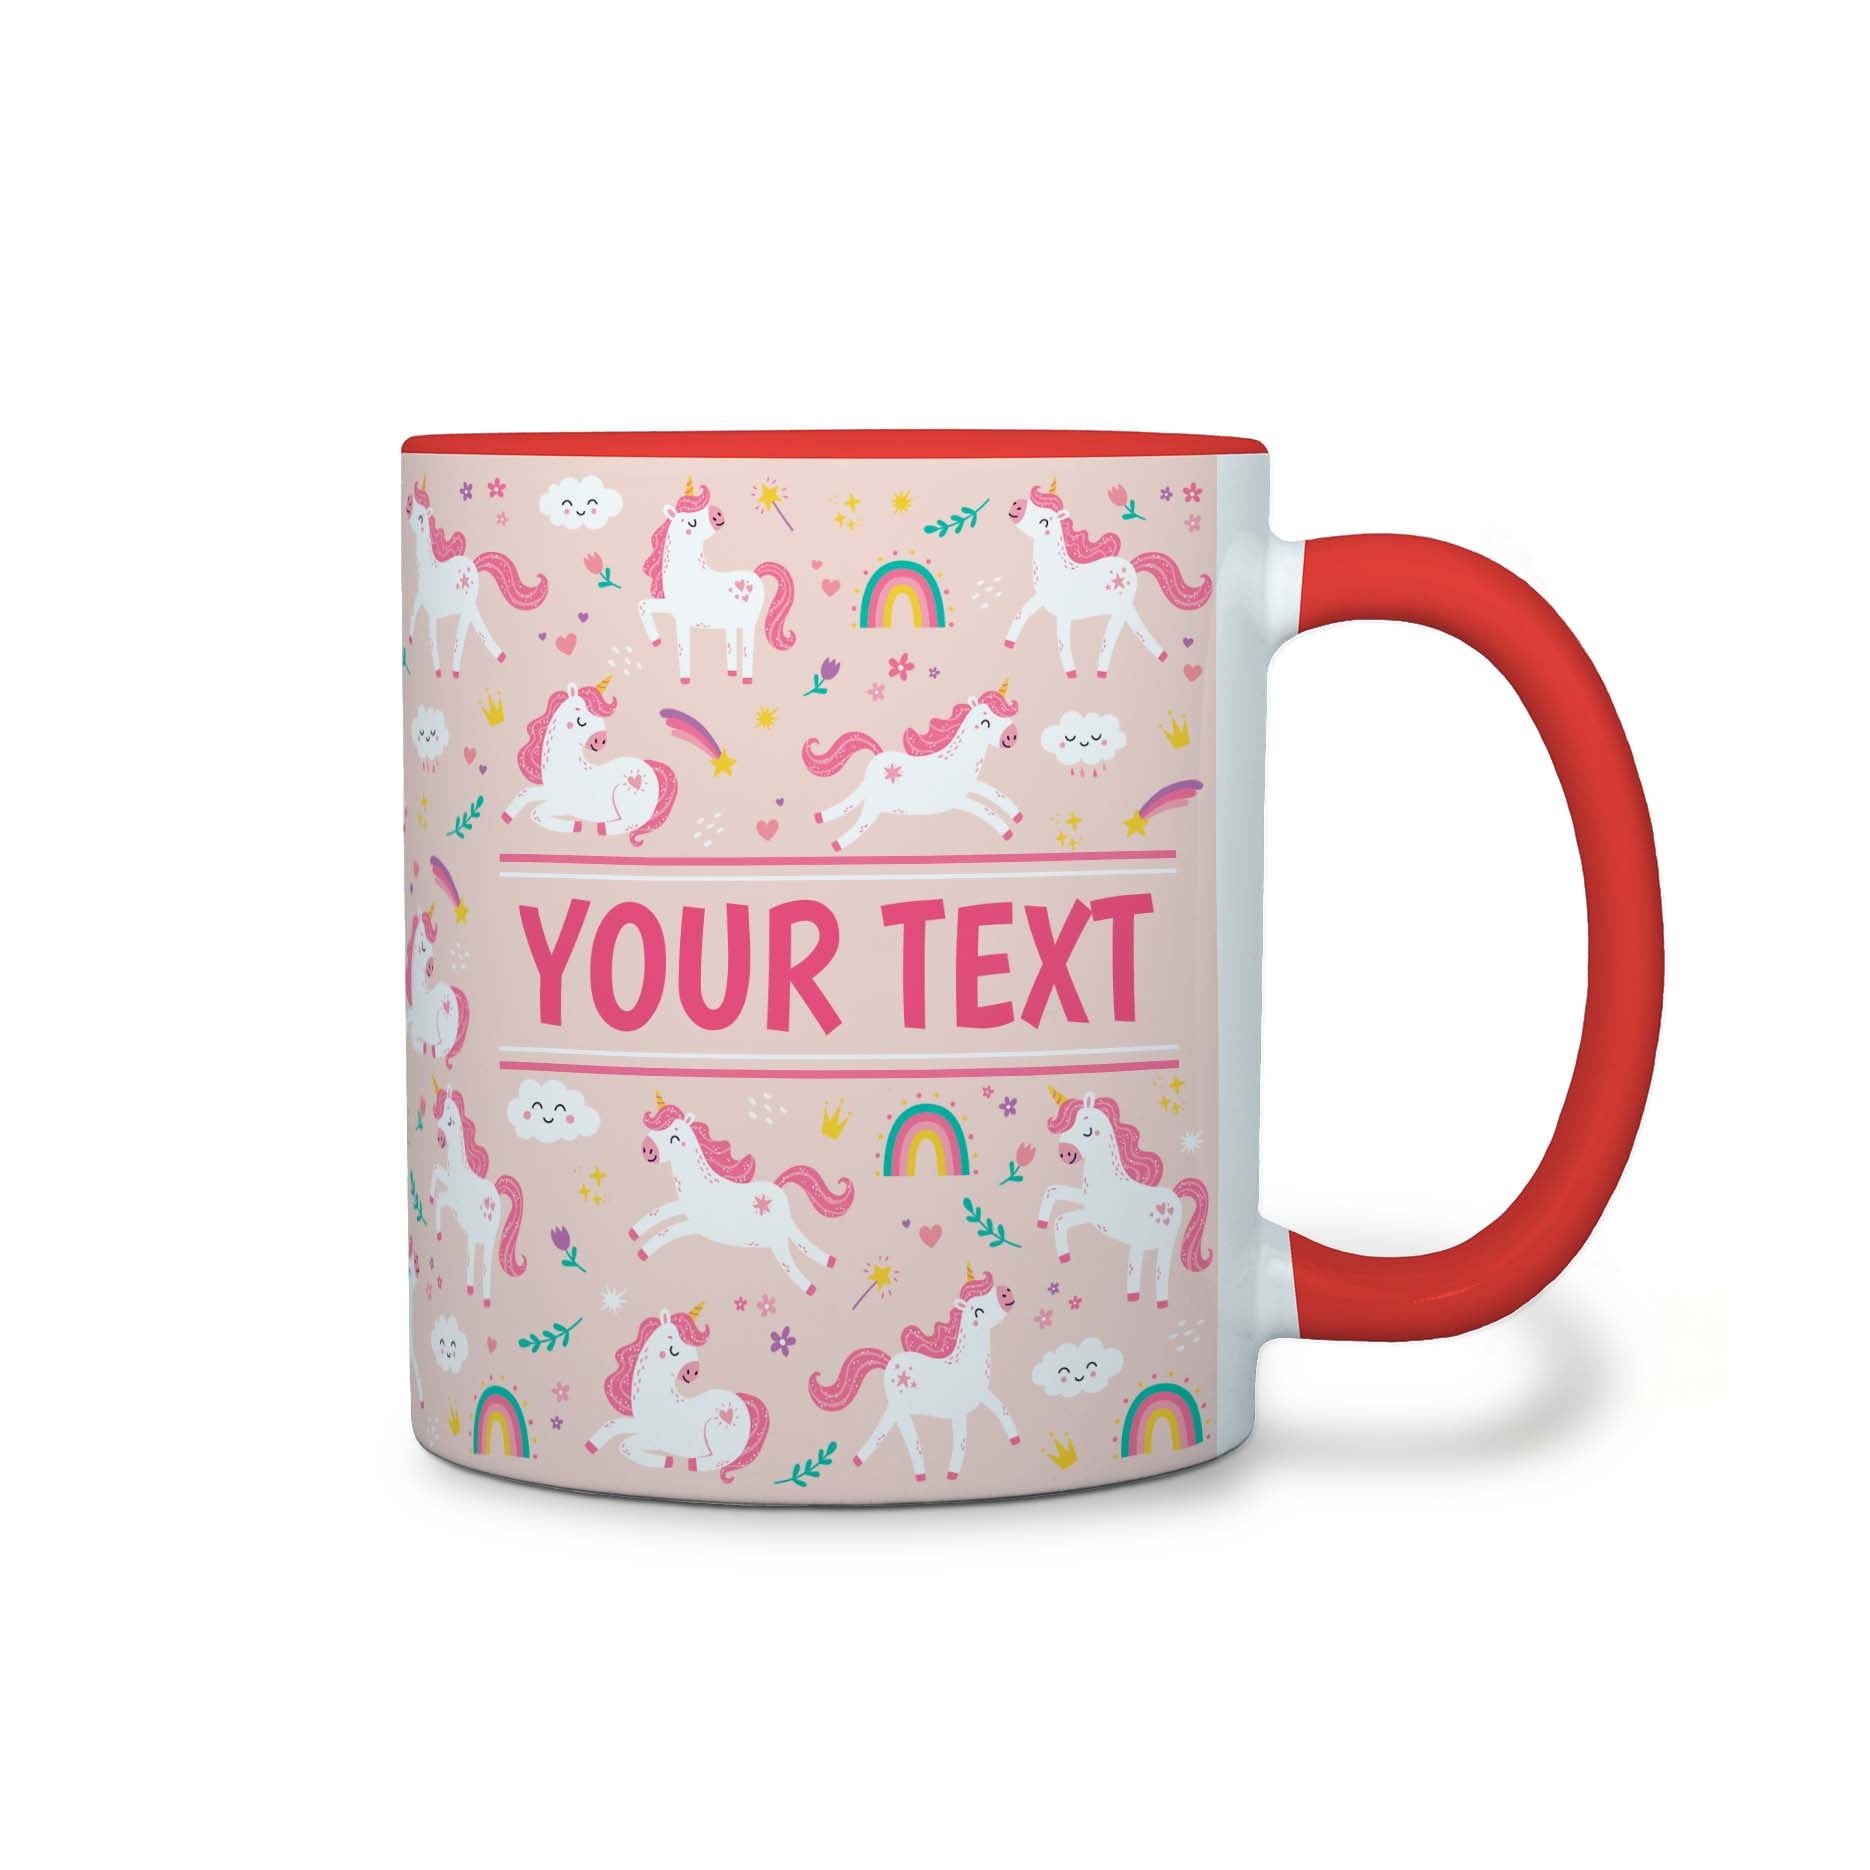 Personalized Red Accent Mug - Unicorns - Pink - 11 Ounces